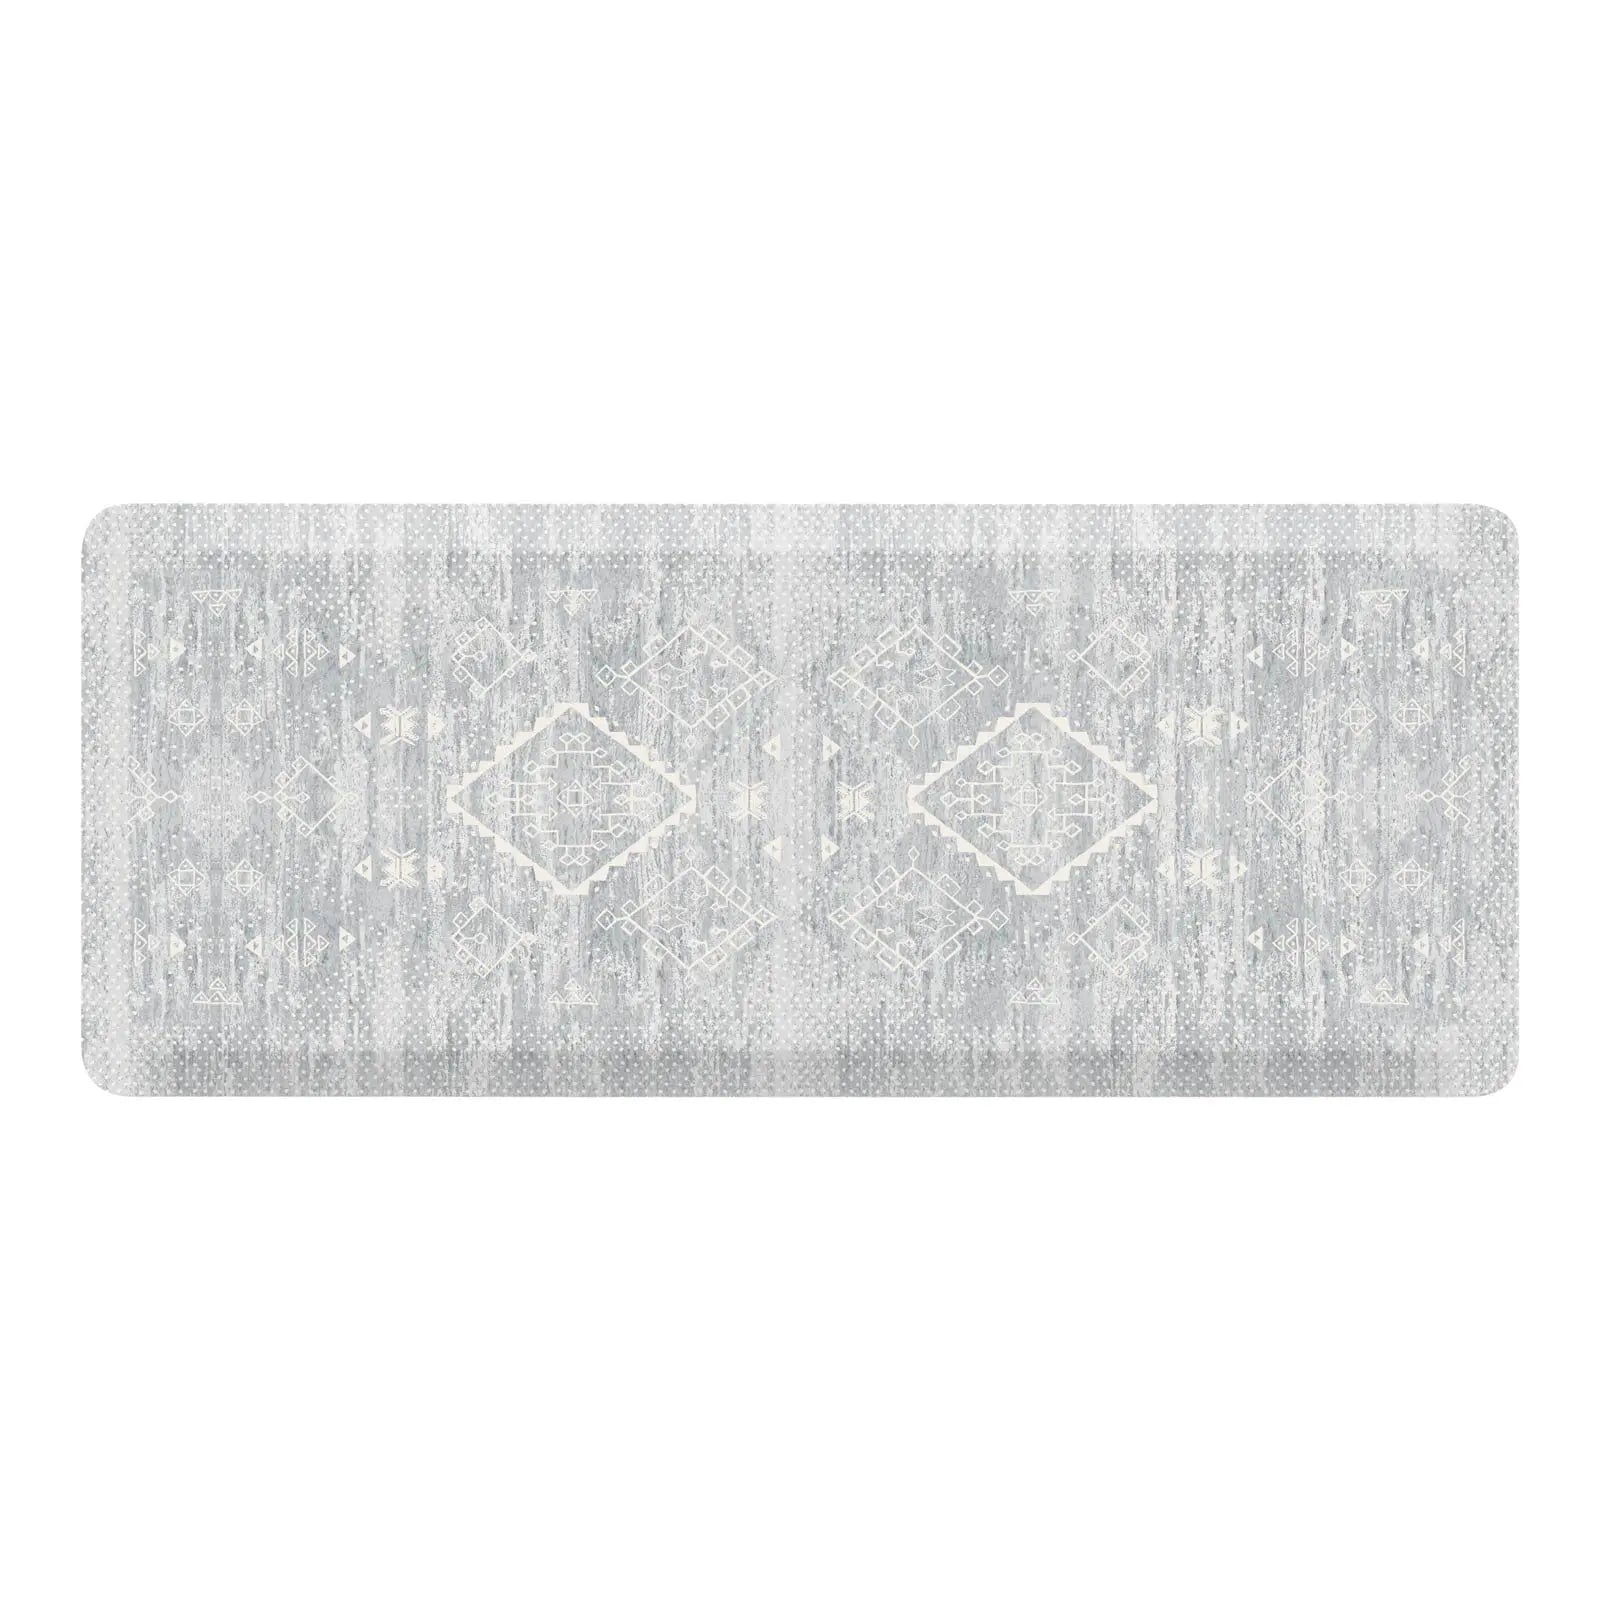 Overhead shot of the Ula gray and white Minimal Boho Pattern anti-fatigue kitchen mat shown in size 22x54